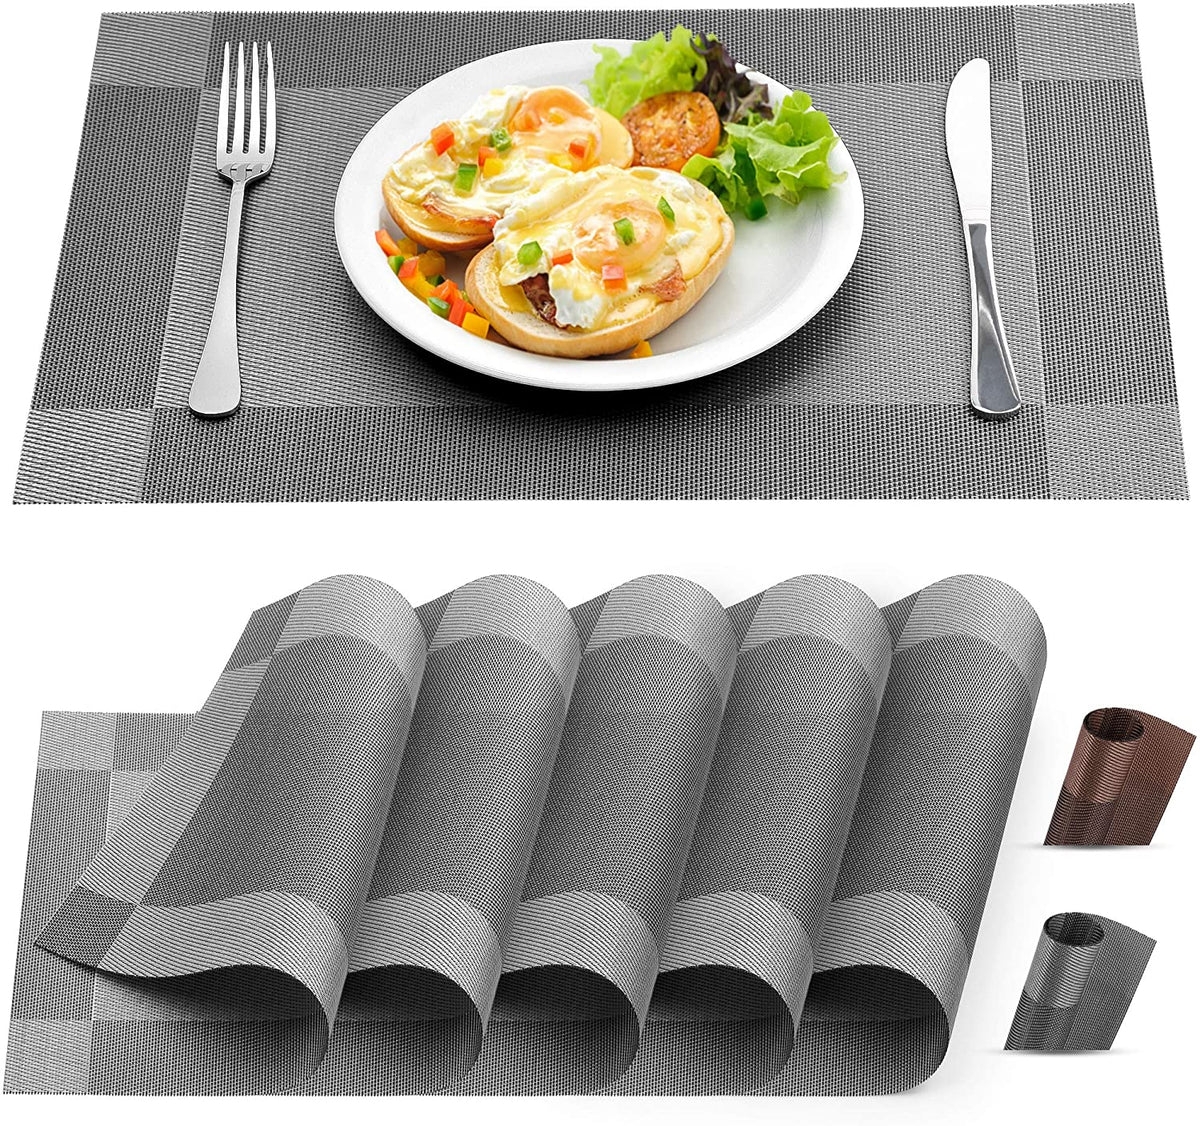 Vinyl Woven Placemats for Dining Table Set of 6 - Brown